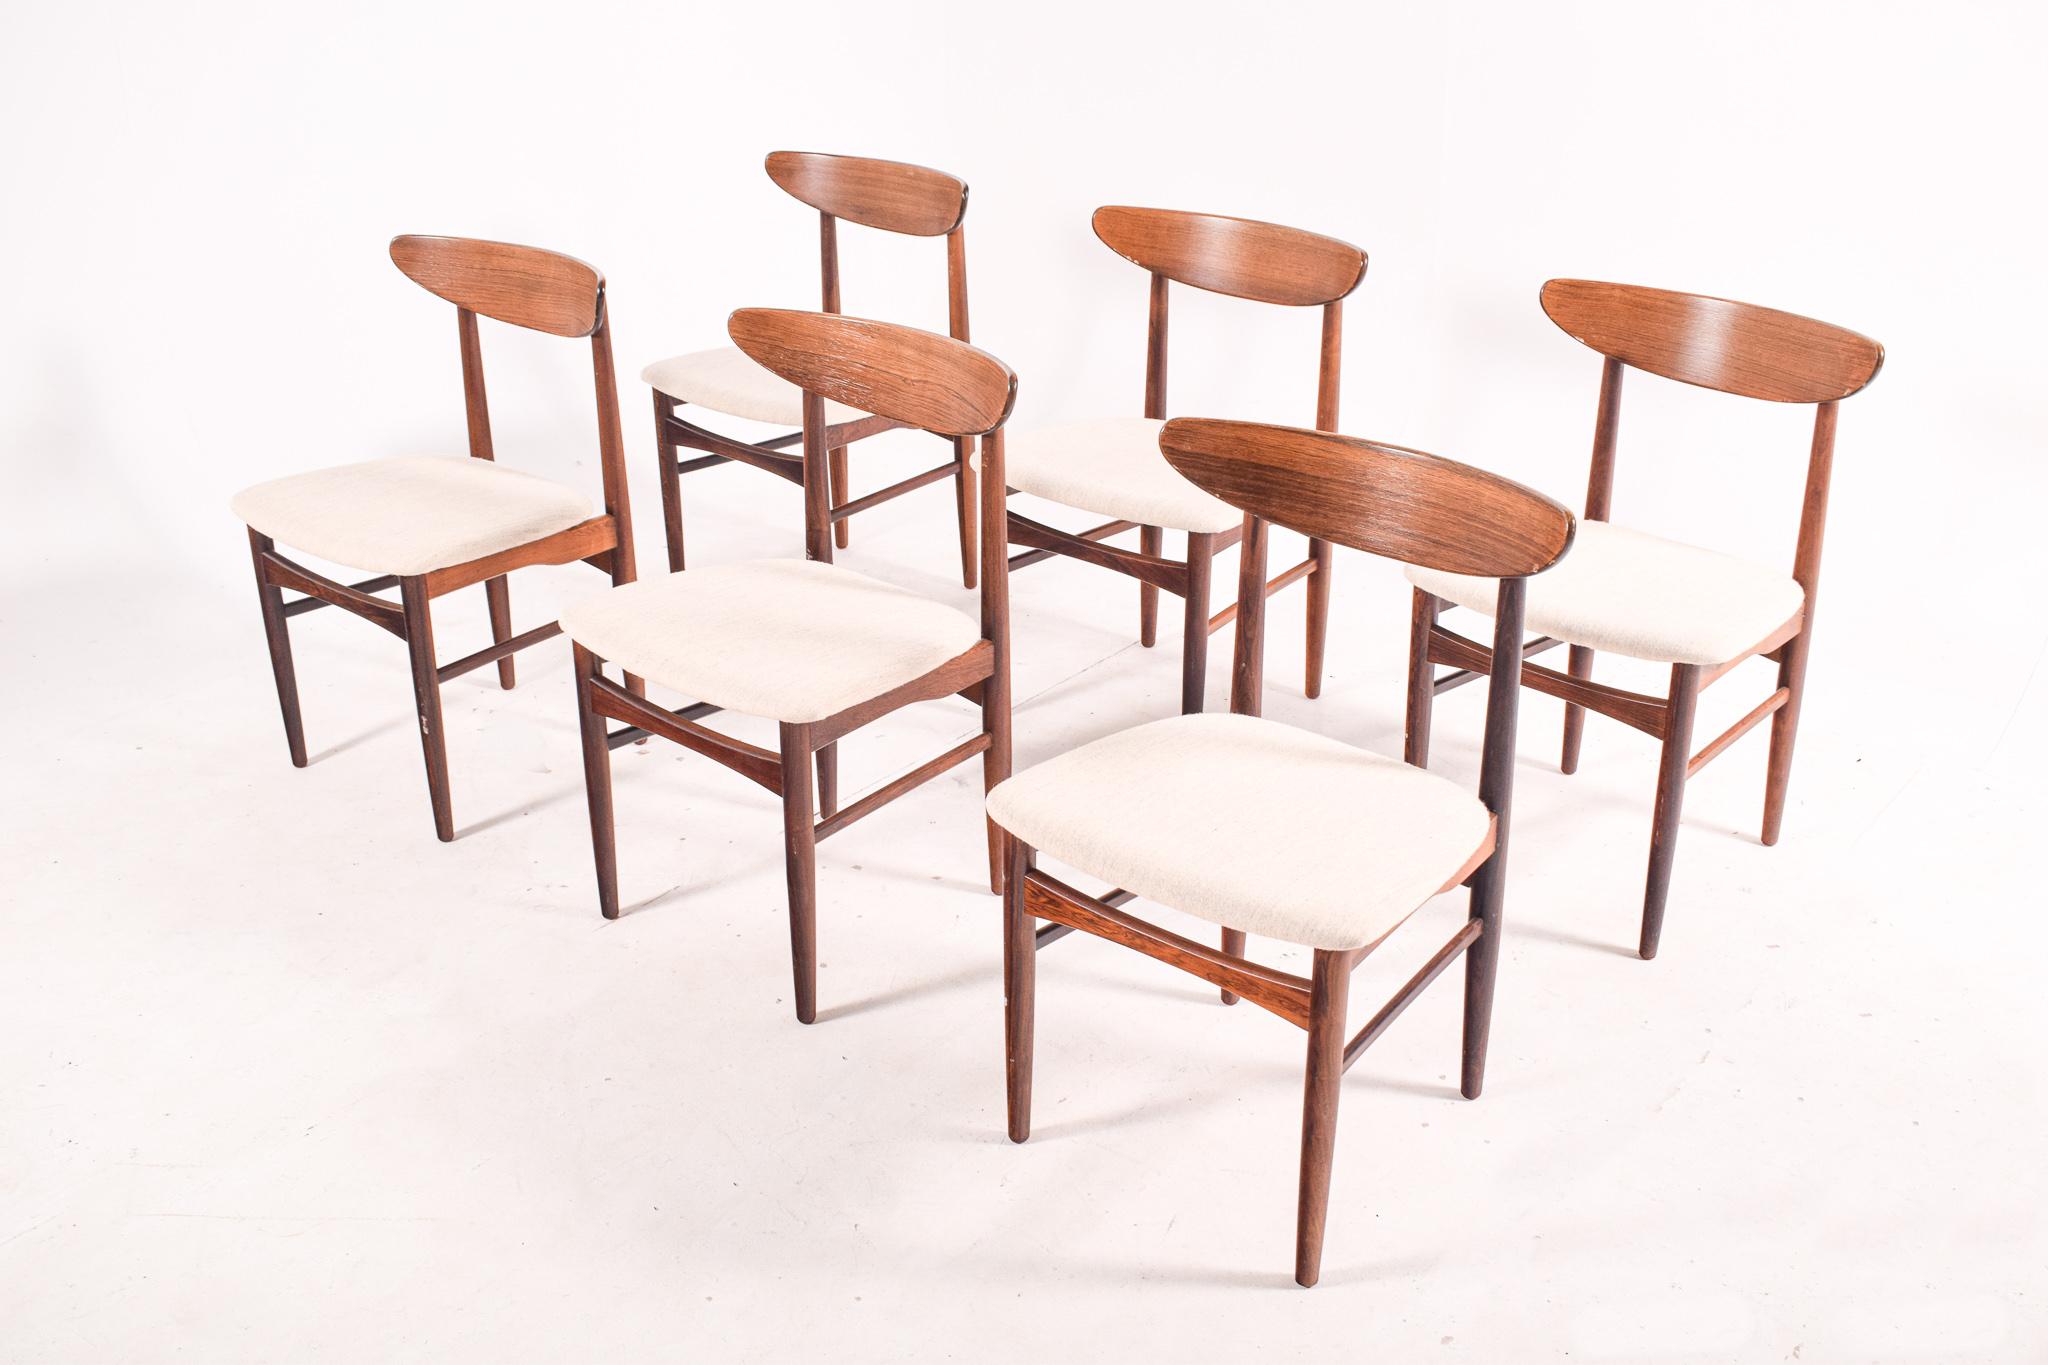 A nice set of six Mid-Century Modern solid rosewood dining chairs by well known Danish manufacturer AS Skovby Møbelfabrik and EW Bach designer. These are almost identical to the Harry Ostergaard dining chairs and they are excellent quality. Marked